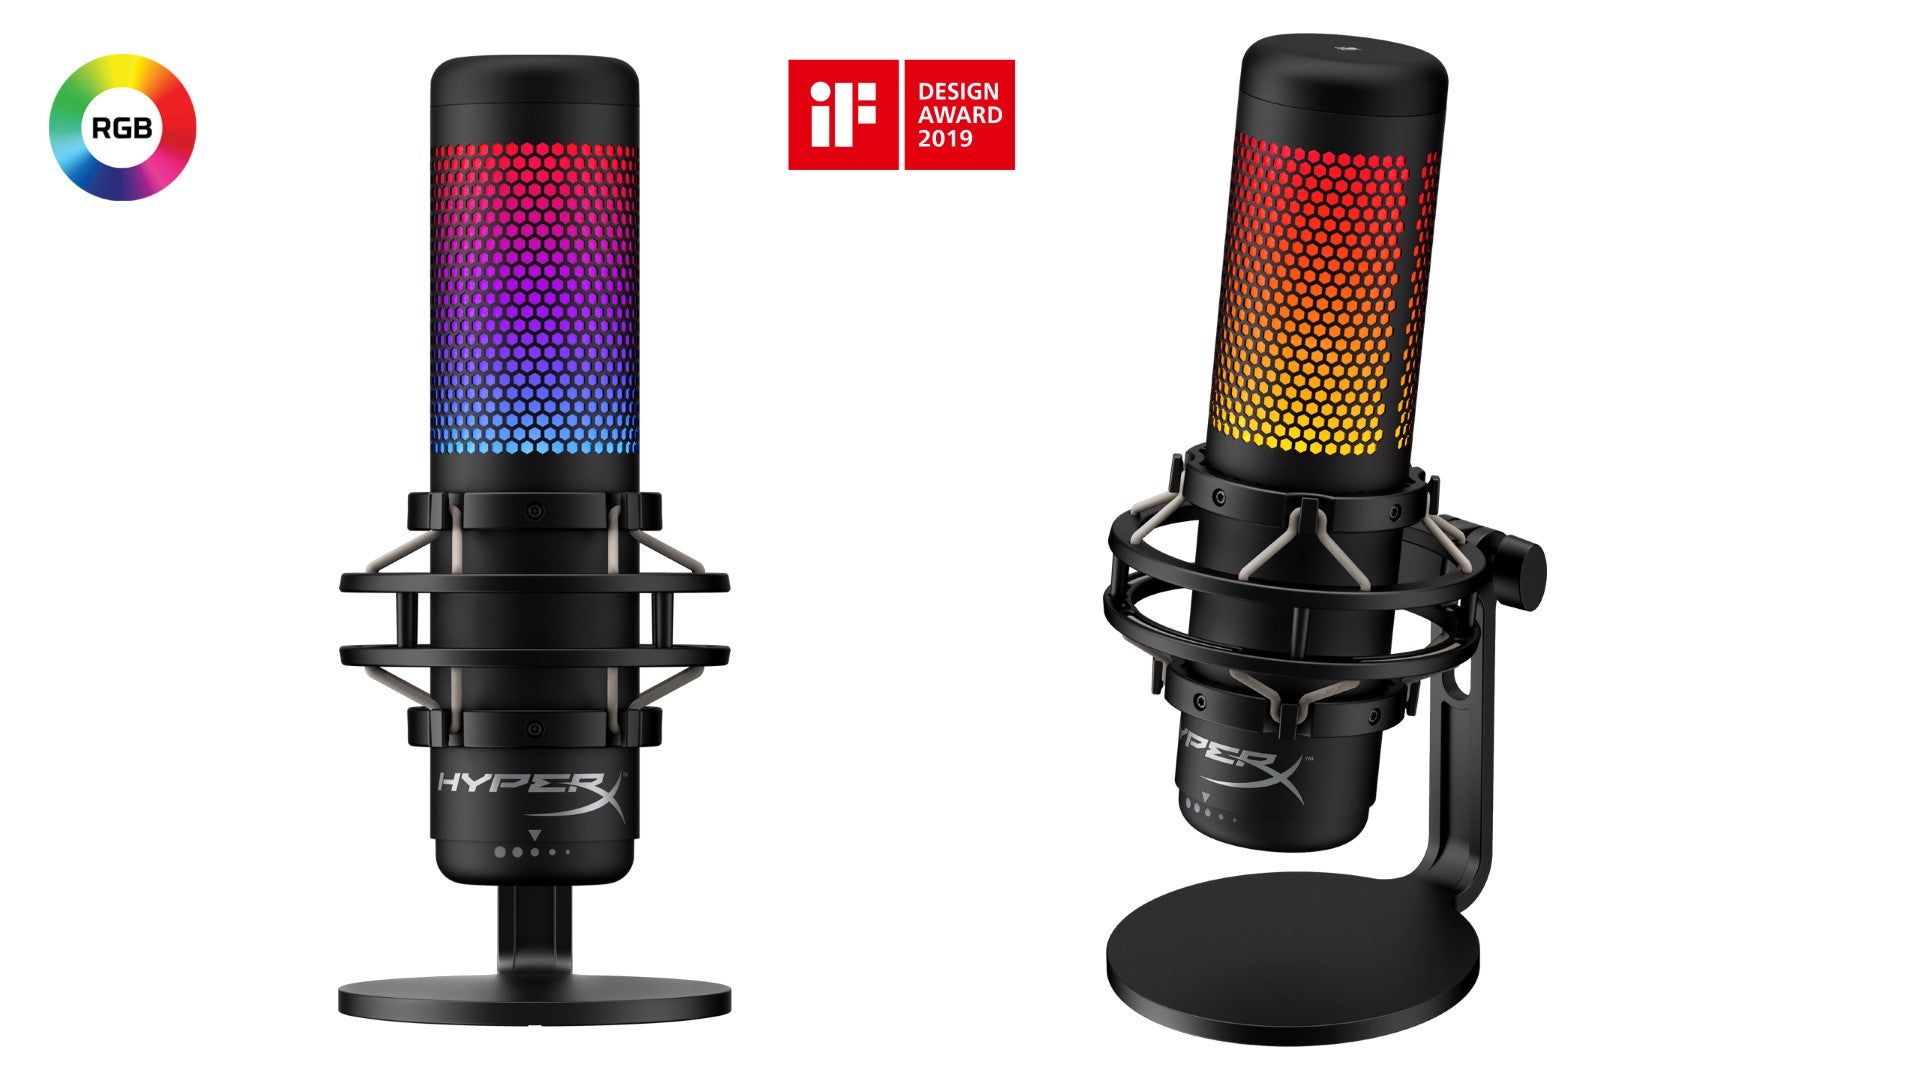 HyperX's Quadcast S microphone gets an RGB makeover | Rock Paper